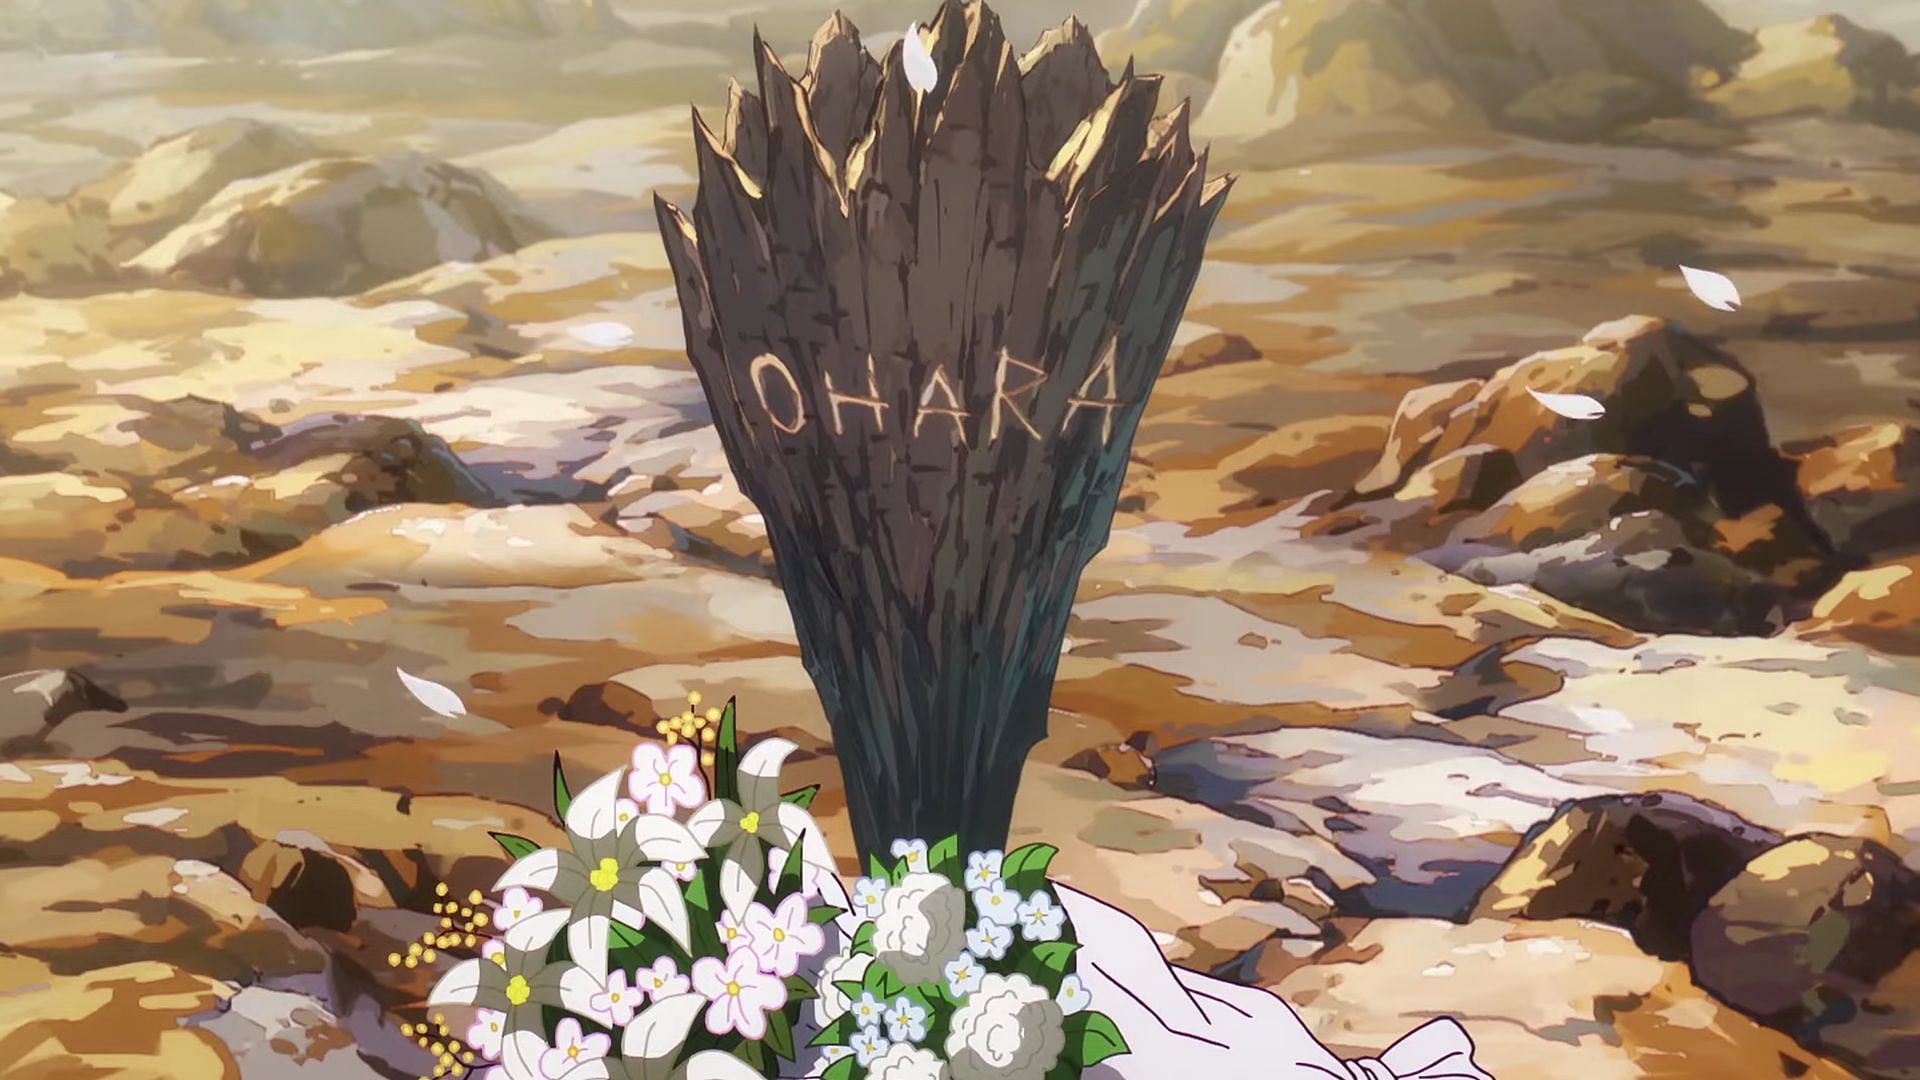 A touching tribute to the victims of Ohara as seen in One Piece episode 1097 (Image via Toei Animation)